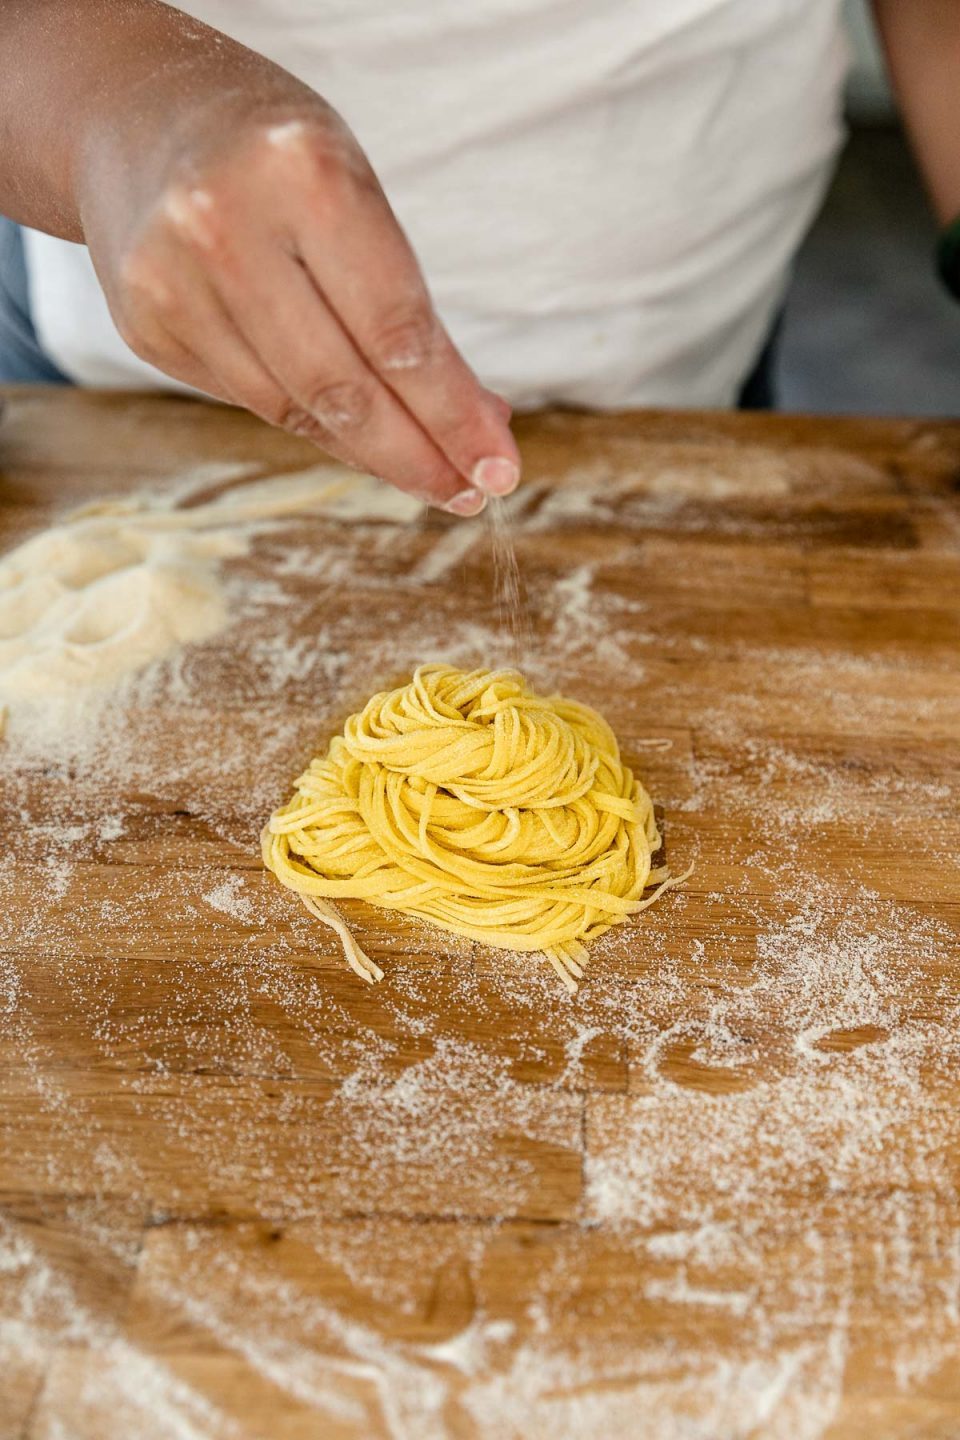 A bundle of fresh pasta cut into spaghetti rests atop a butcher block countertop that is dusted with semolina flour. A woman's hand dusts additional semolina flour over the bundle.